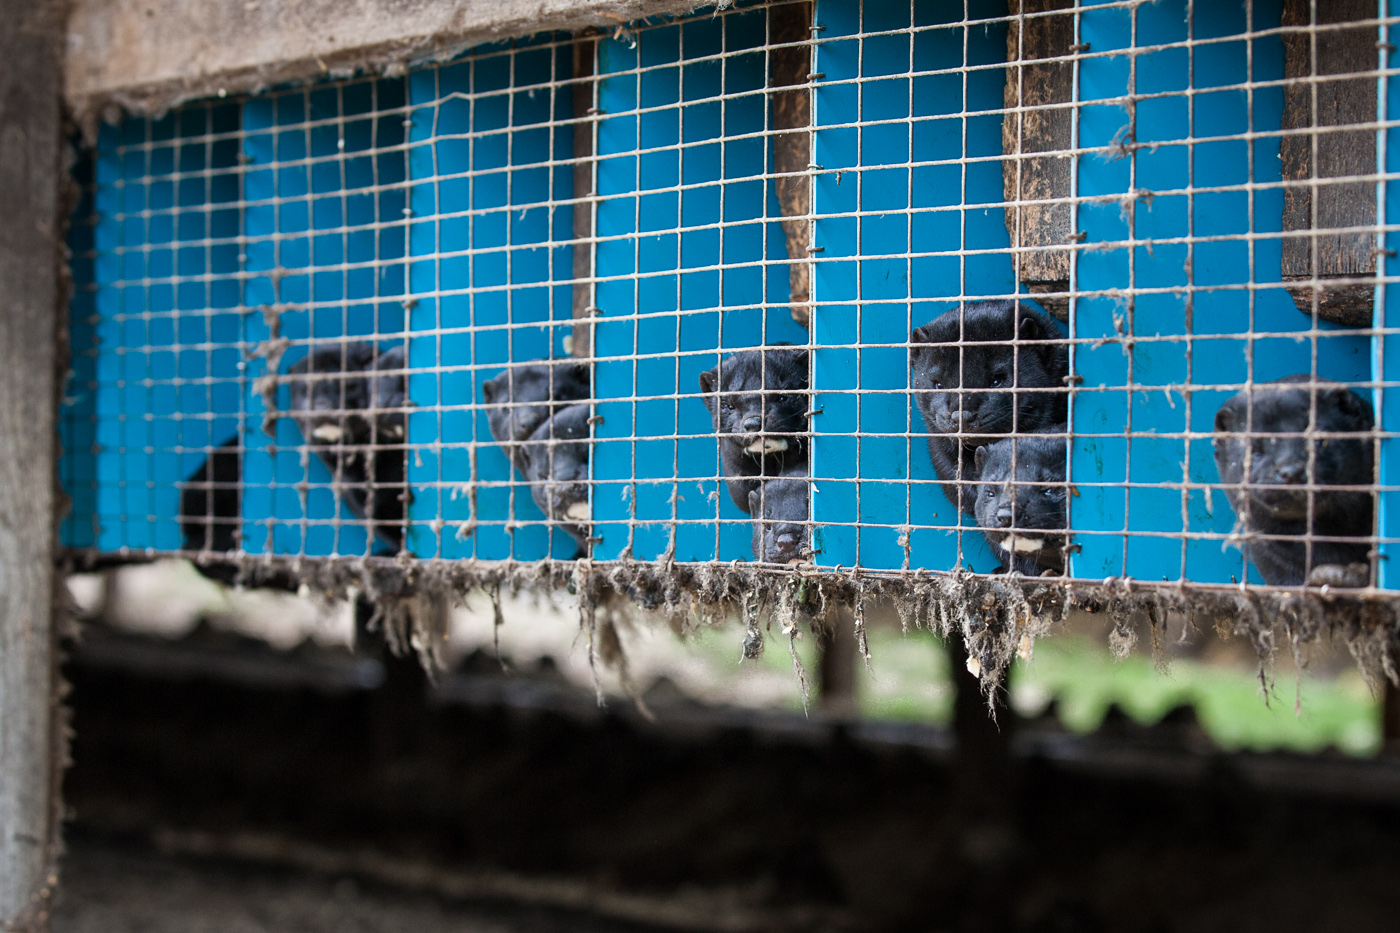 agriculture photographer - minks in cages on a Wisconsin mink farm